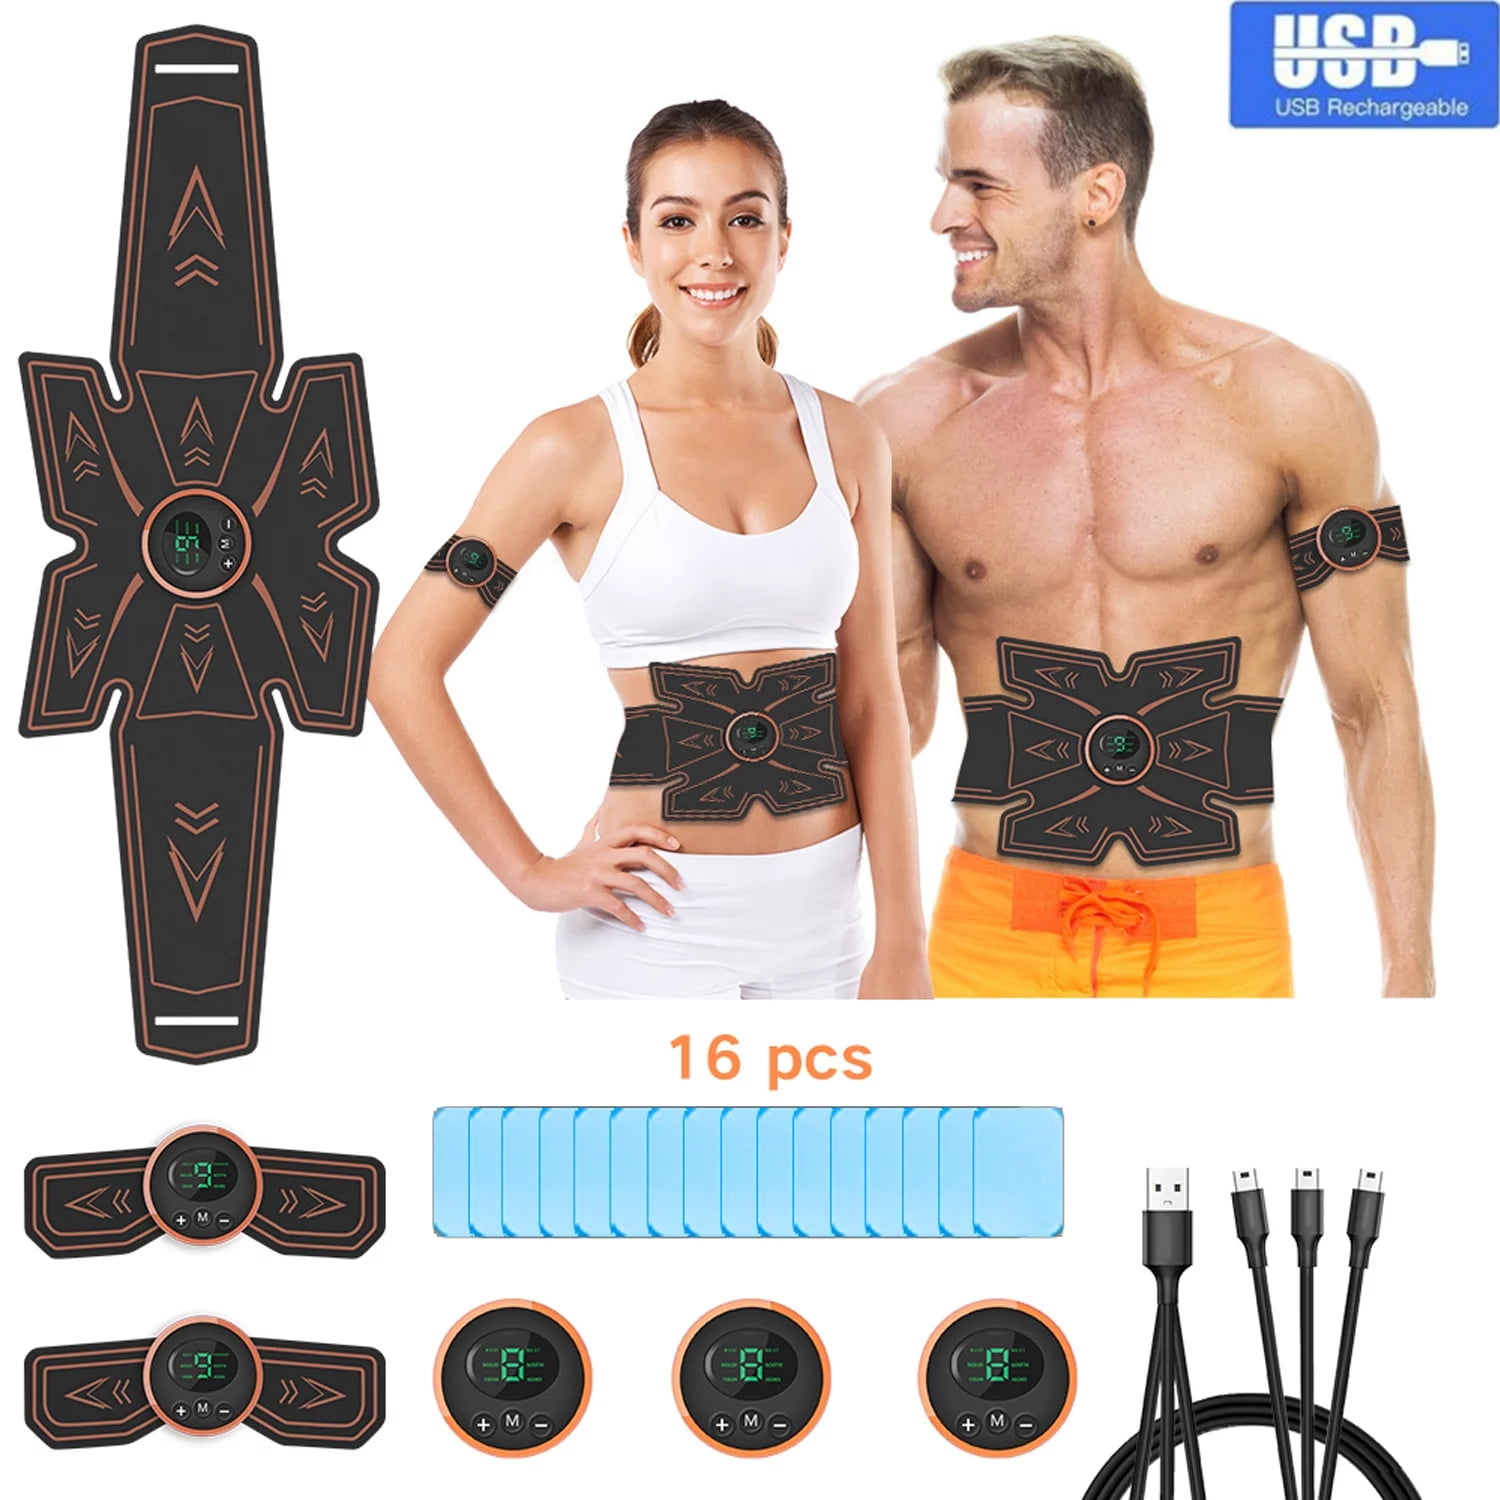 Ripley - ELECTROESTIMULADOR MUSCULAR ABDOMINAL SMART FITNESS SIX PACK